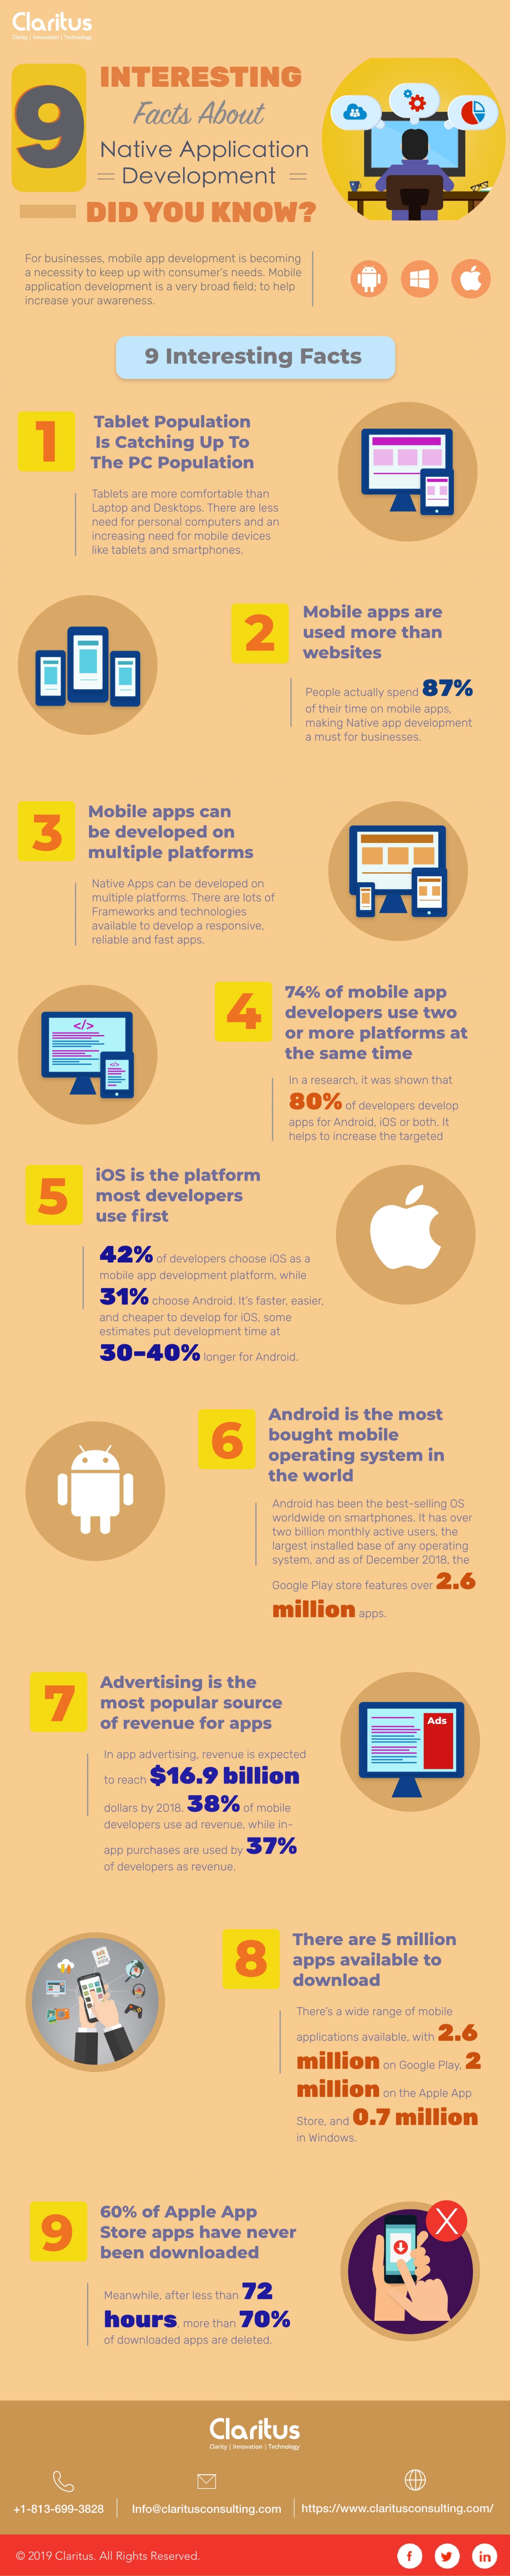 9 Interesting Facts About Native Application Development - DID YOU KNOW